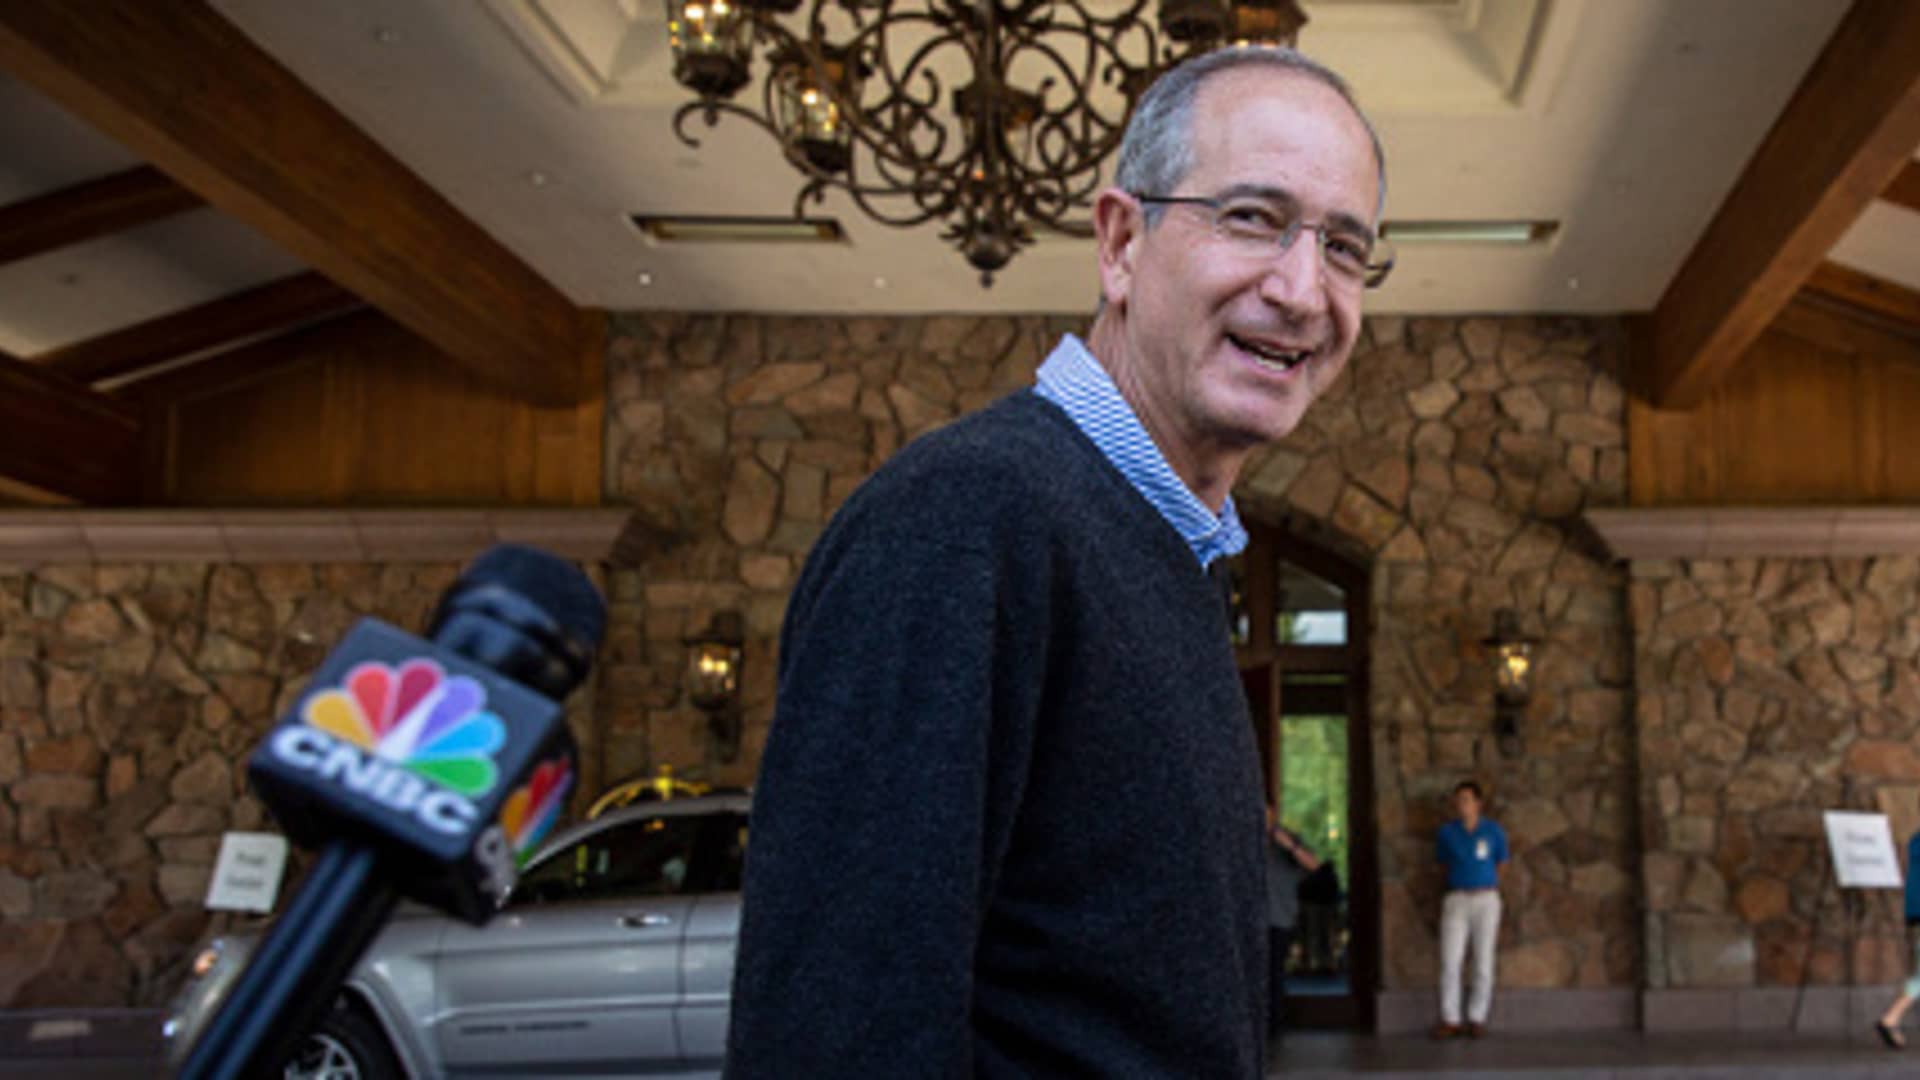 Brian Roberts, chief executive officer of Comcast, arrives for the annual Allen & Company Sun Valley Conference, July 9, 2019 in Sun Valley, Idaho.